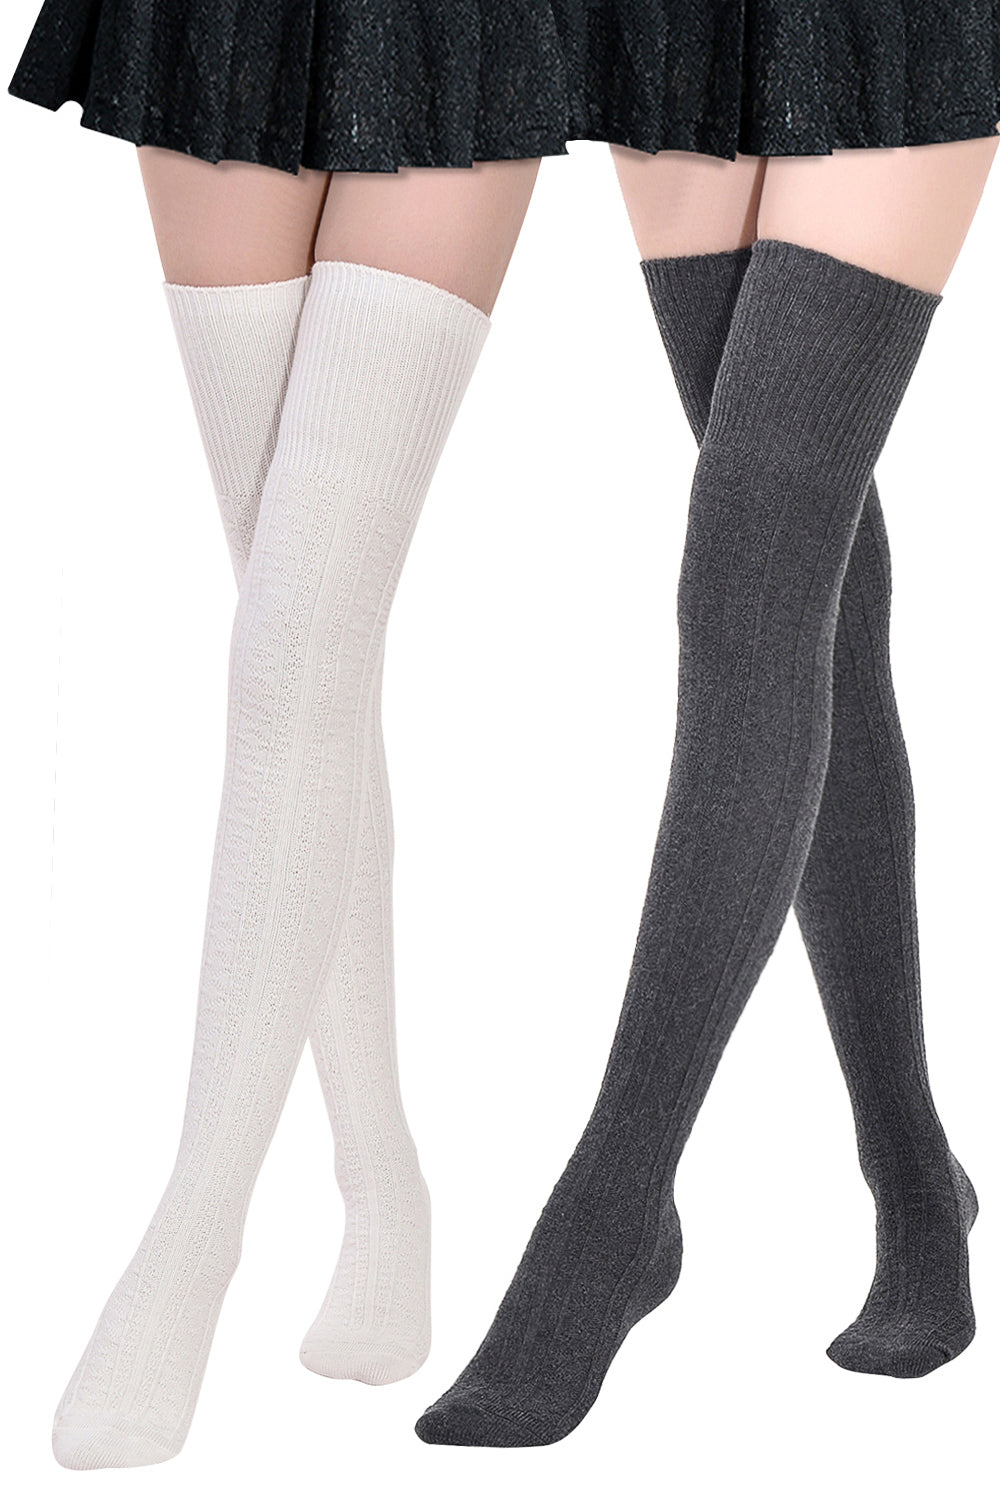 Kayhoma Extra Long Cotton Thigh High Socks Over the Knee High Boot Sto